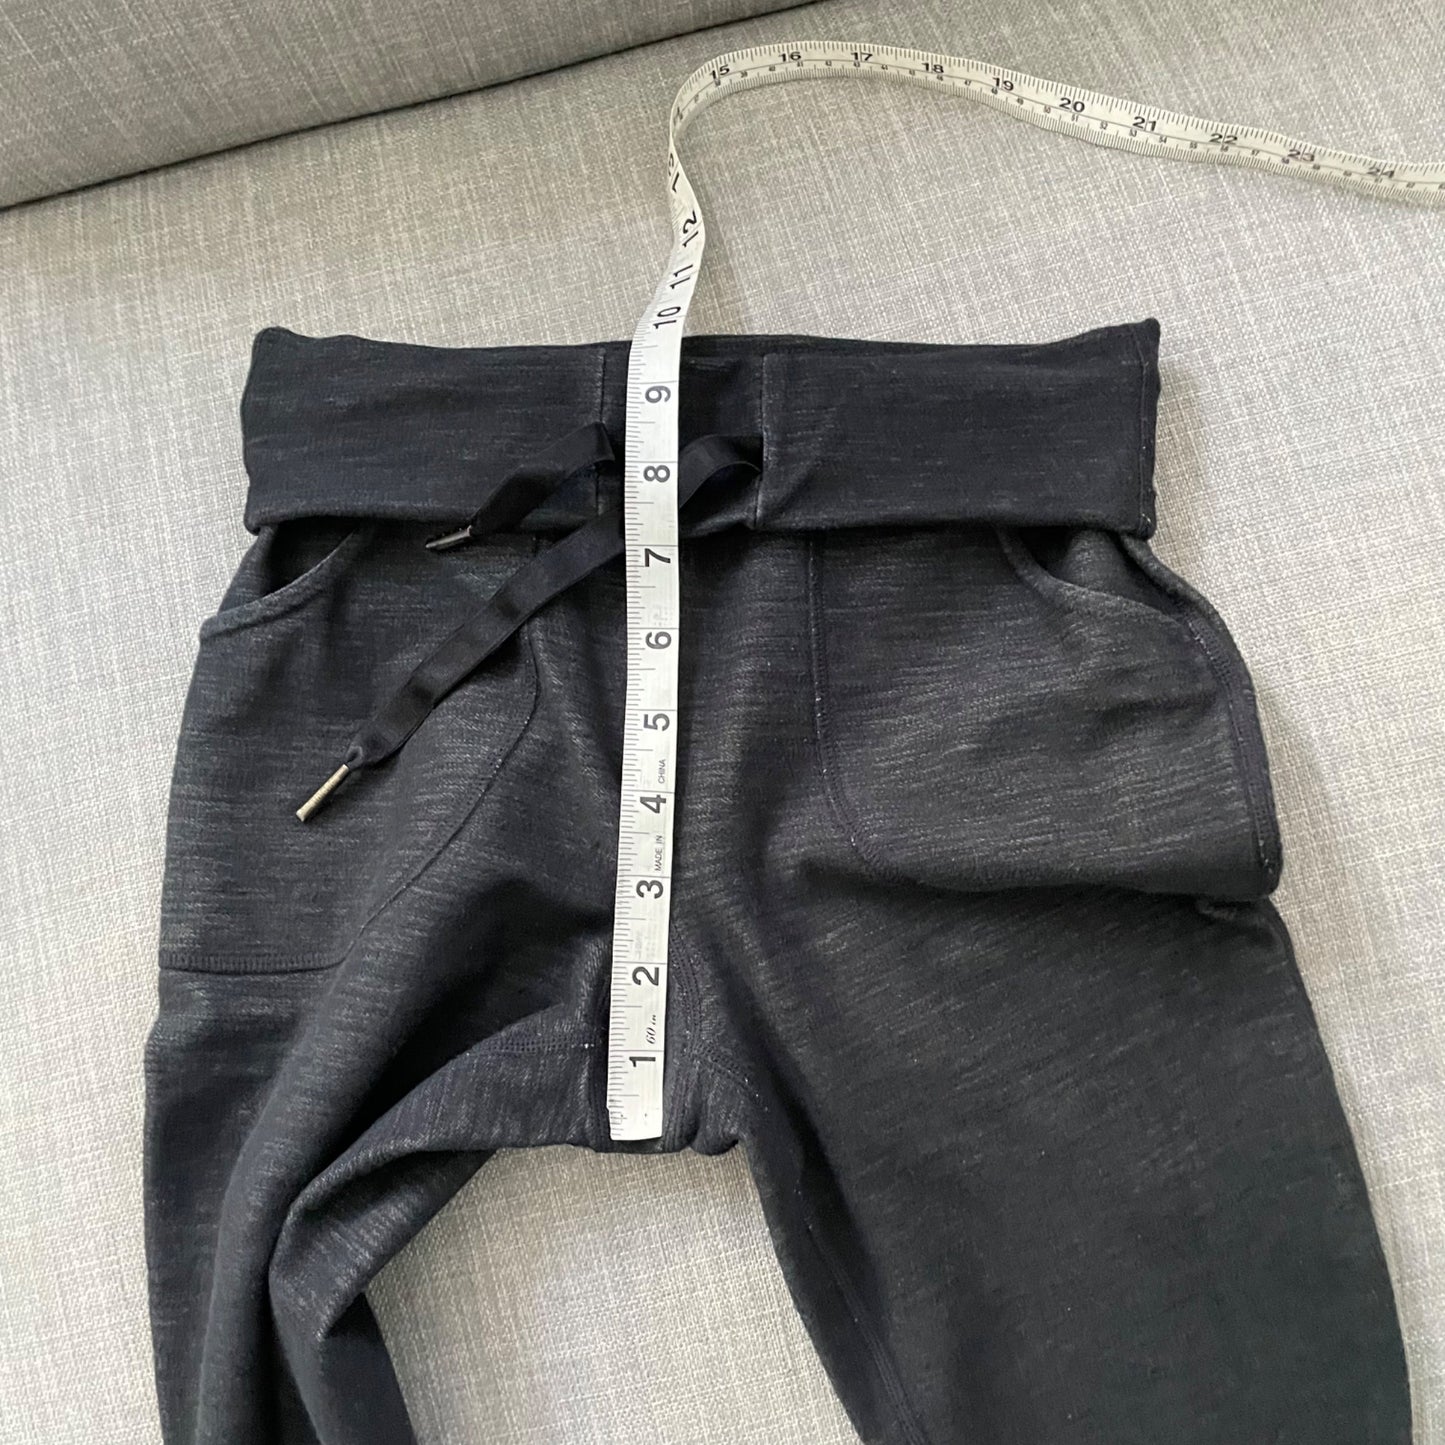 Lululemon Skinny Will Pant in Pique Luon Gray Pockets Women's Size 2 Athleisure